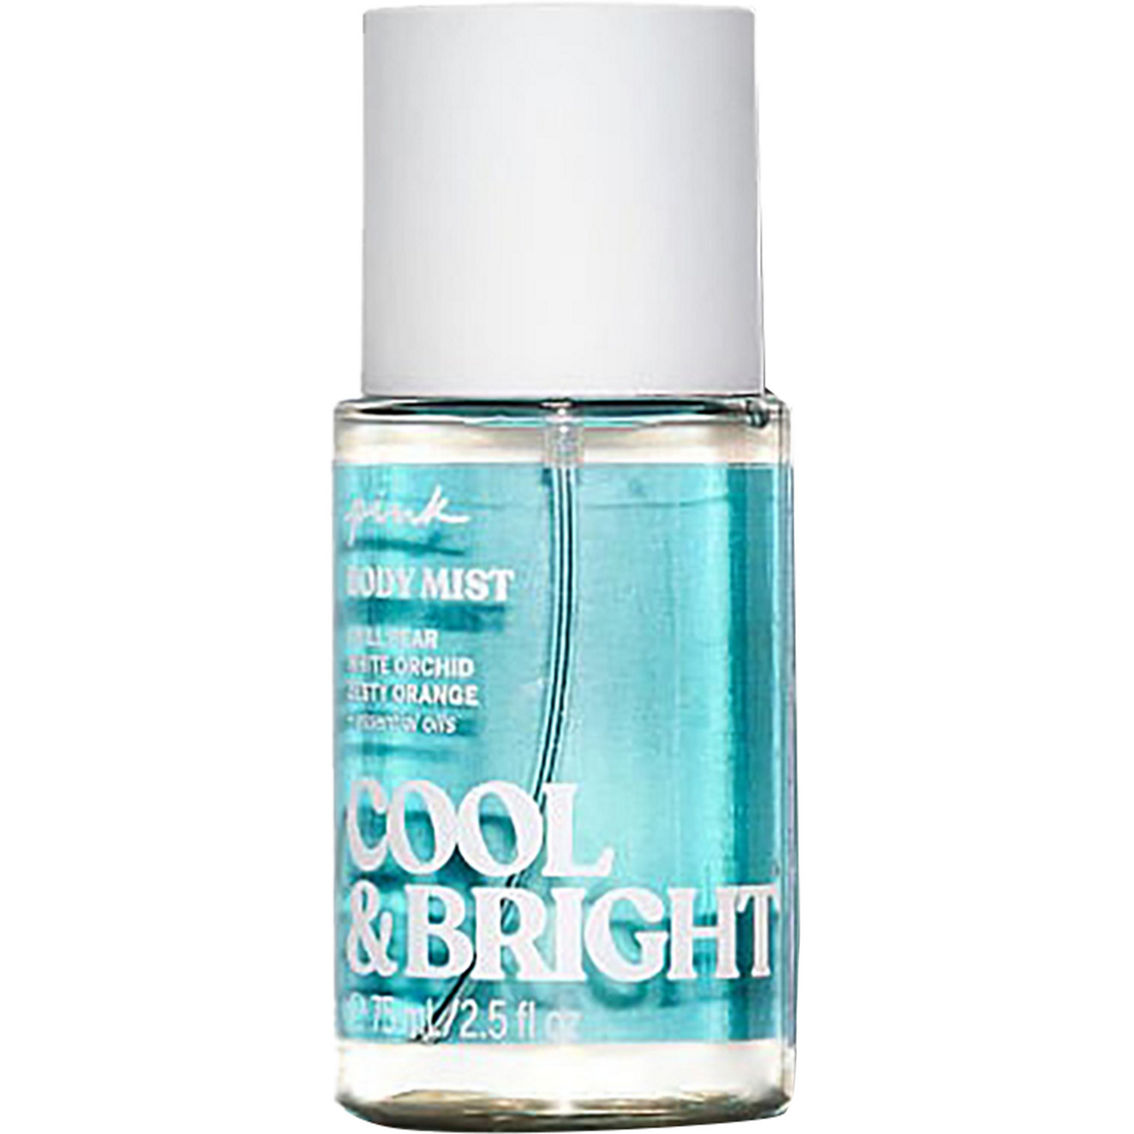 cool and bright travel size